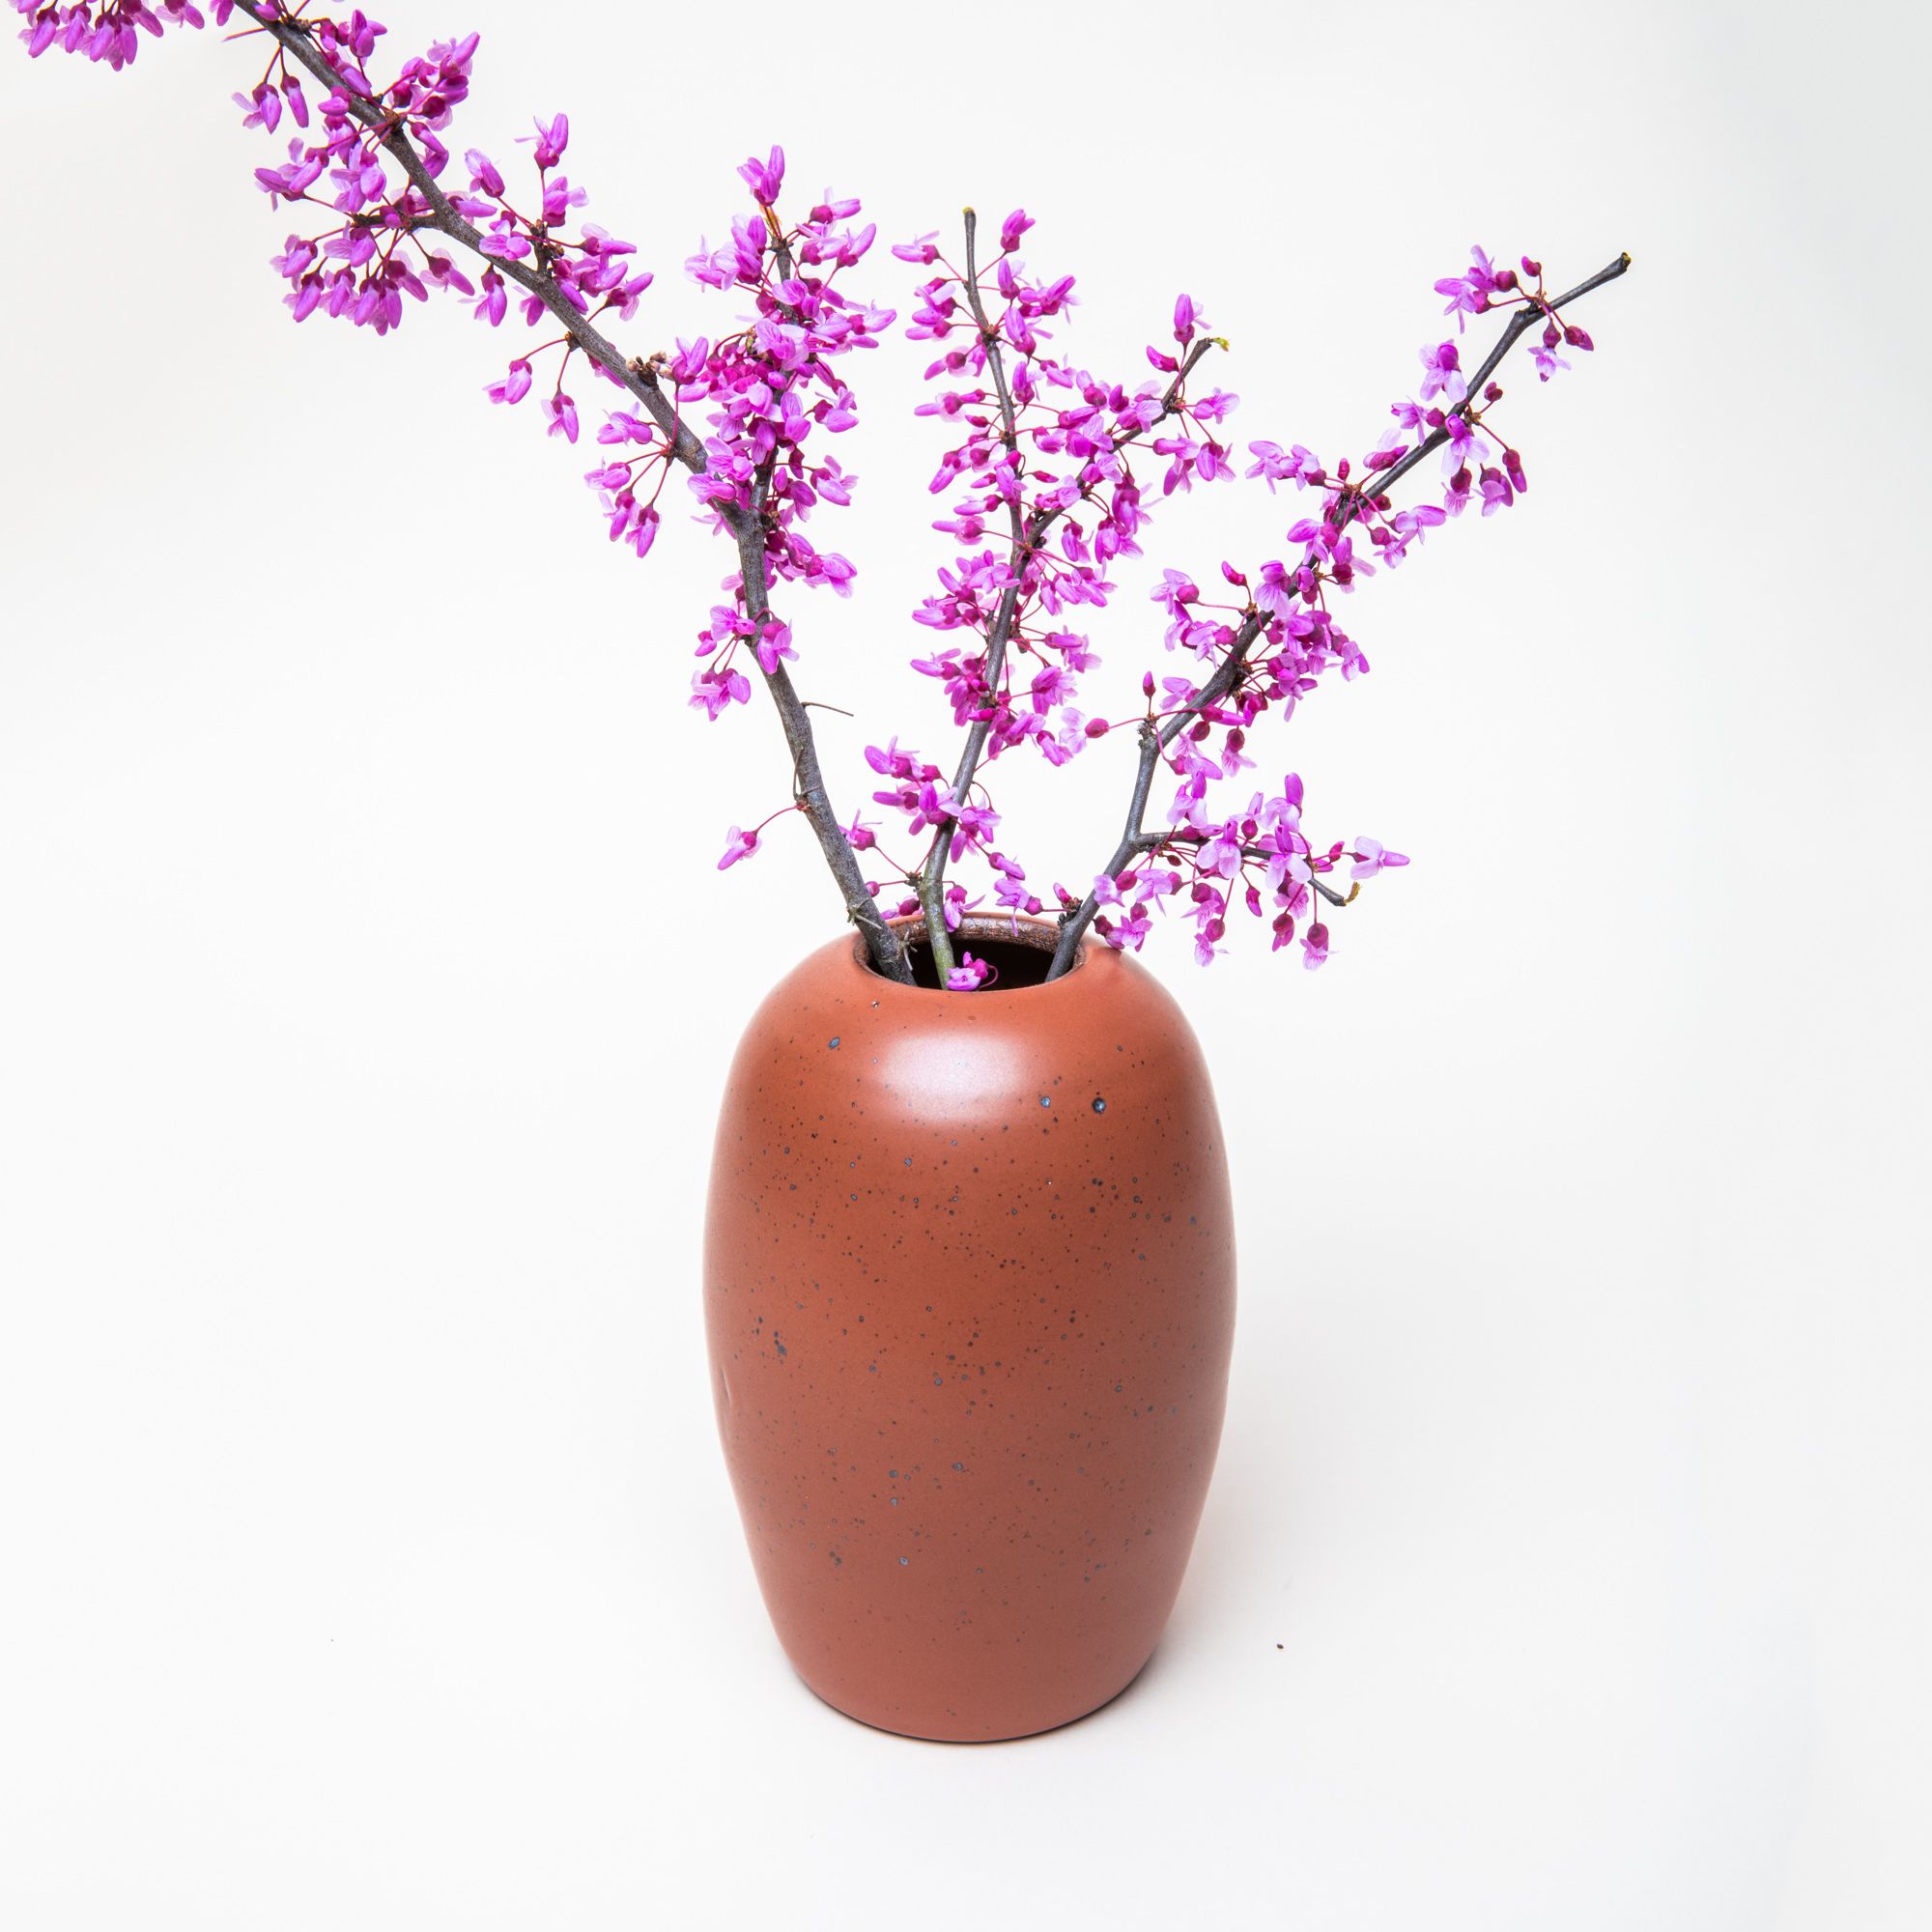 A ceramic vase in a cool burnt terracotta color featuring iron speckles with a long oval body with bright magenta branch flowers sitting inside